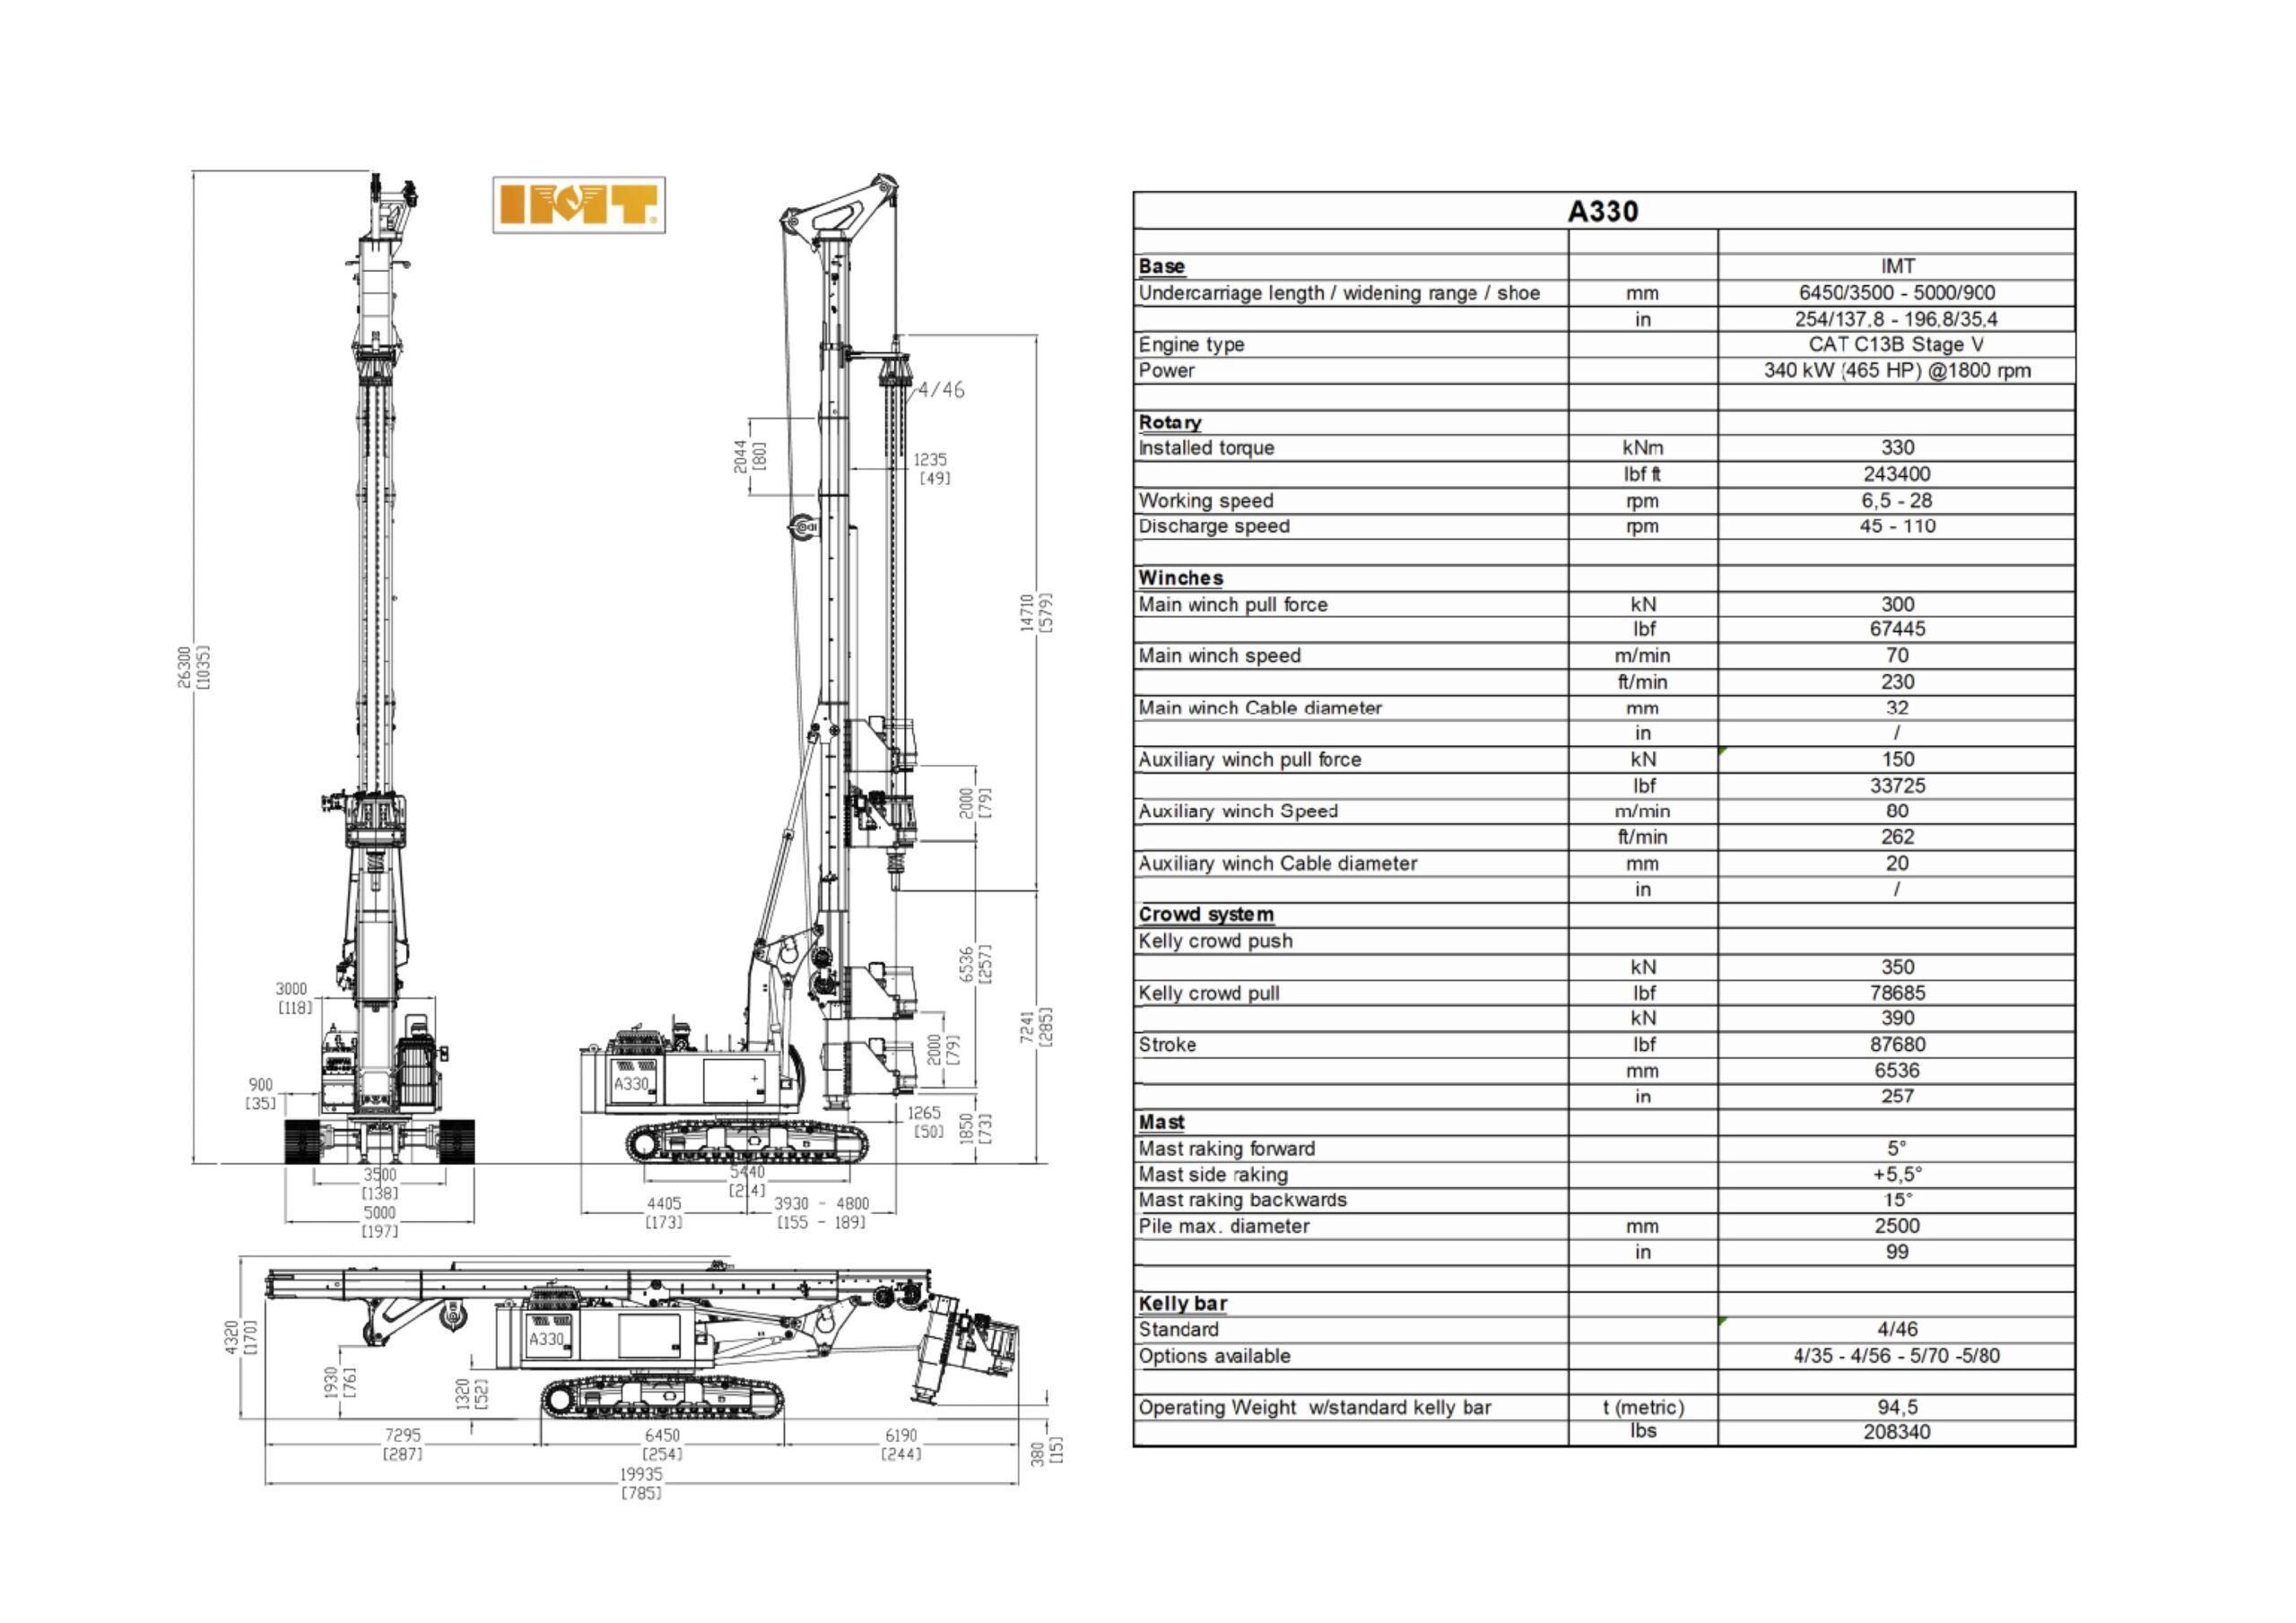 imt-industria-meccanica-trivelle-drill-piling-rigs-machines-products-A330-application-lca-version-1